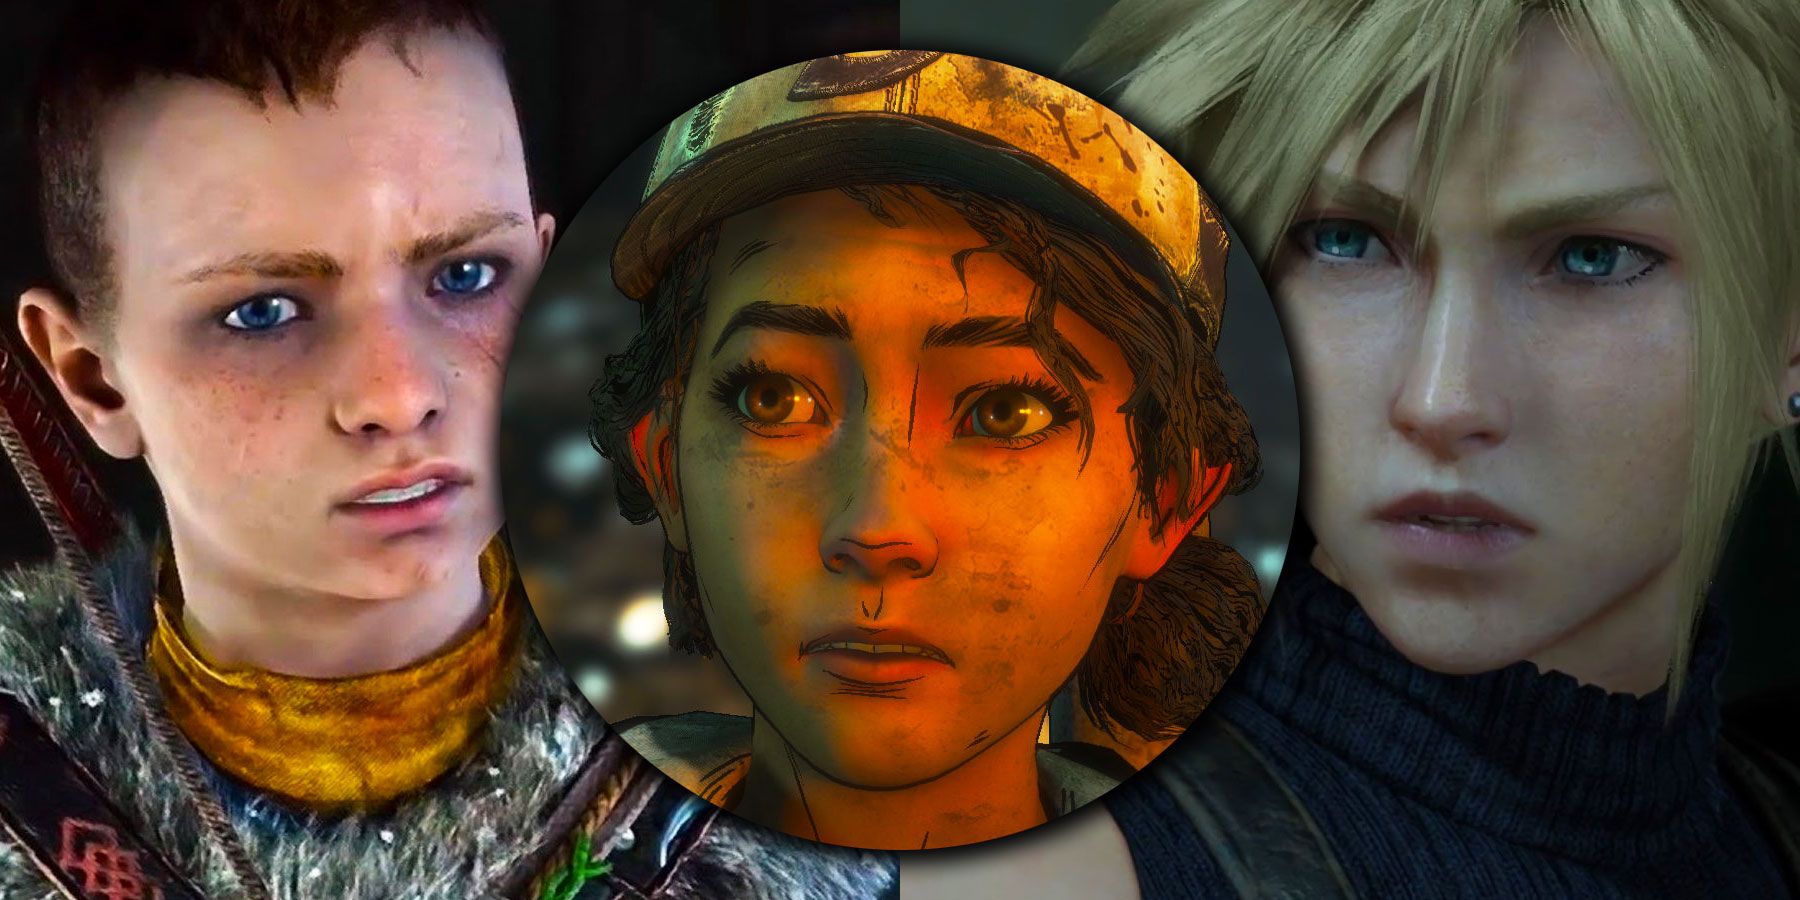 Atreus from God Of War, Clementine from Telltale's The Walking Dead, and Cloud Strife from Final Fantasy VII collage image